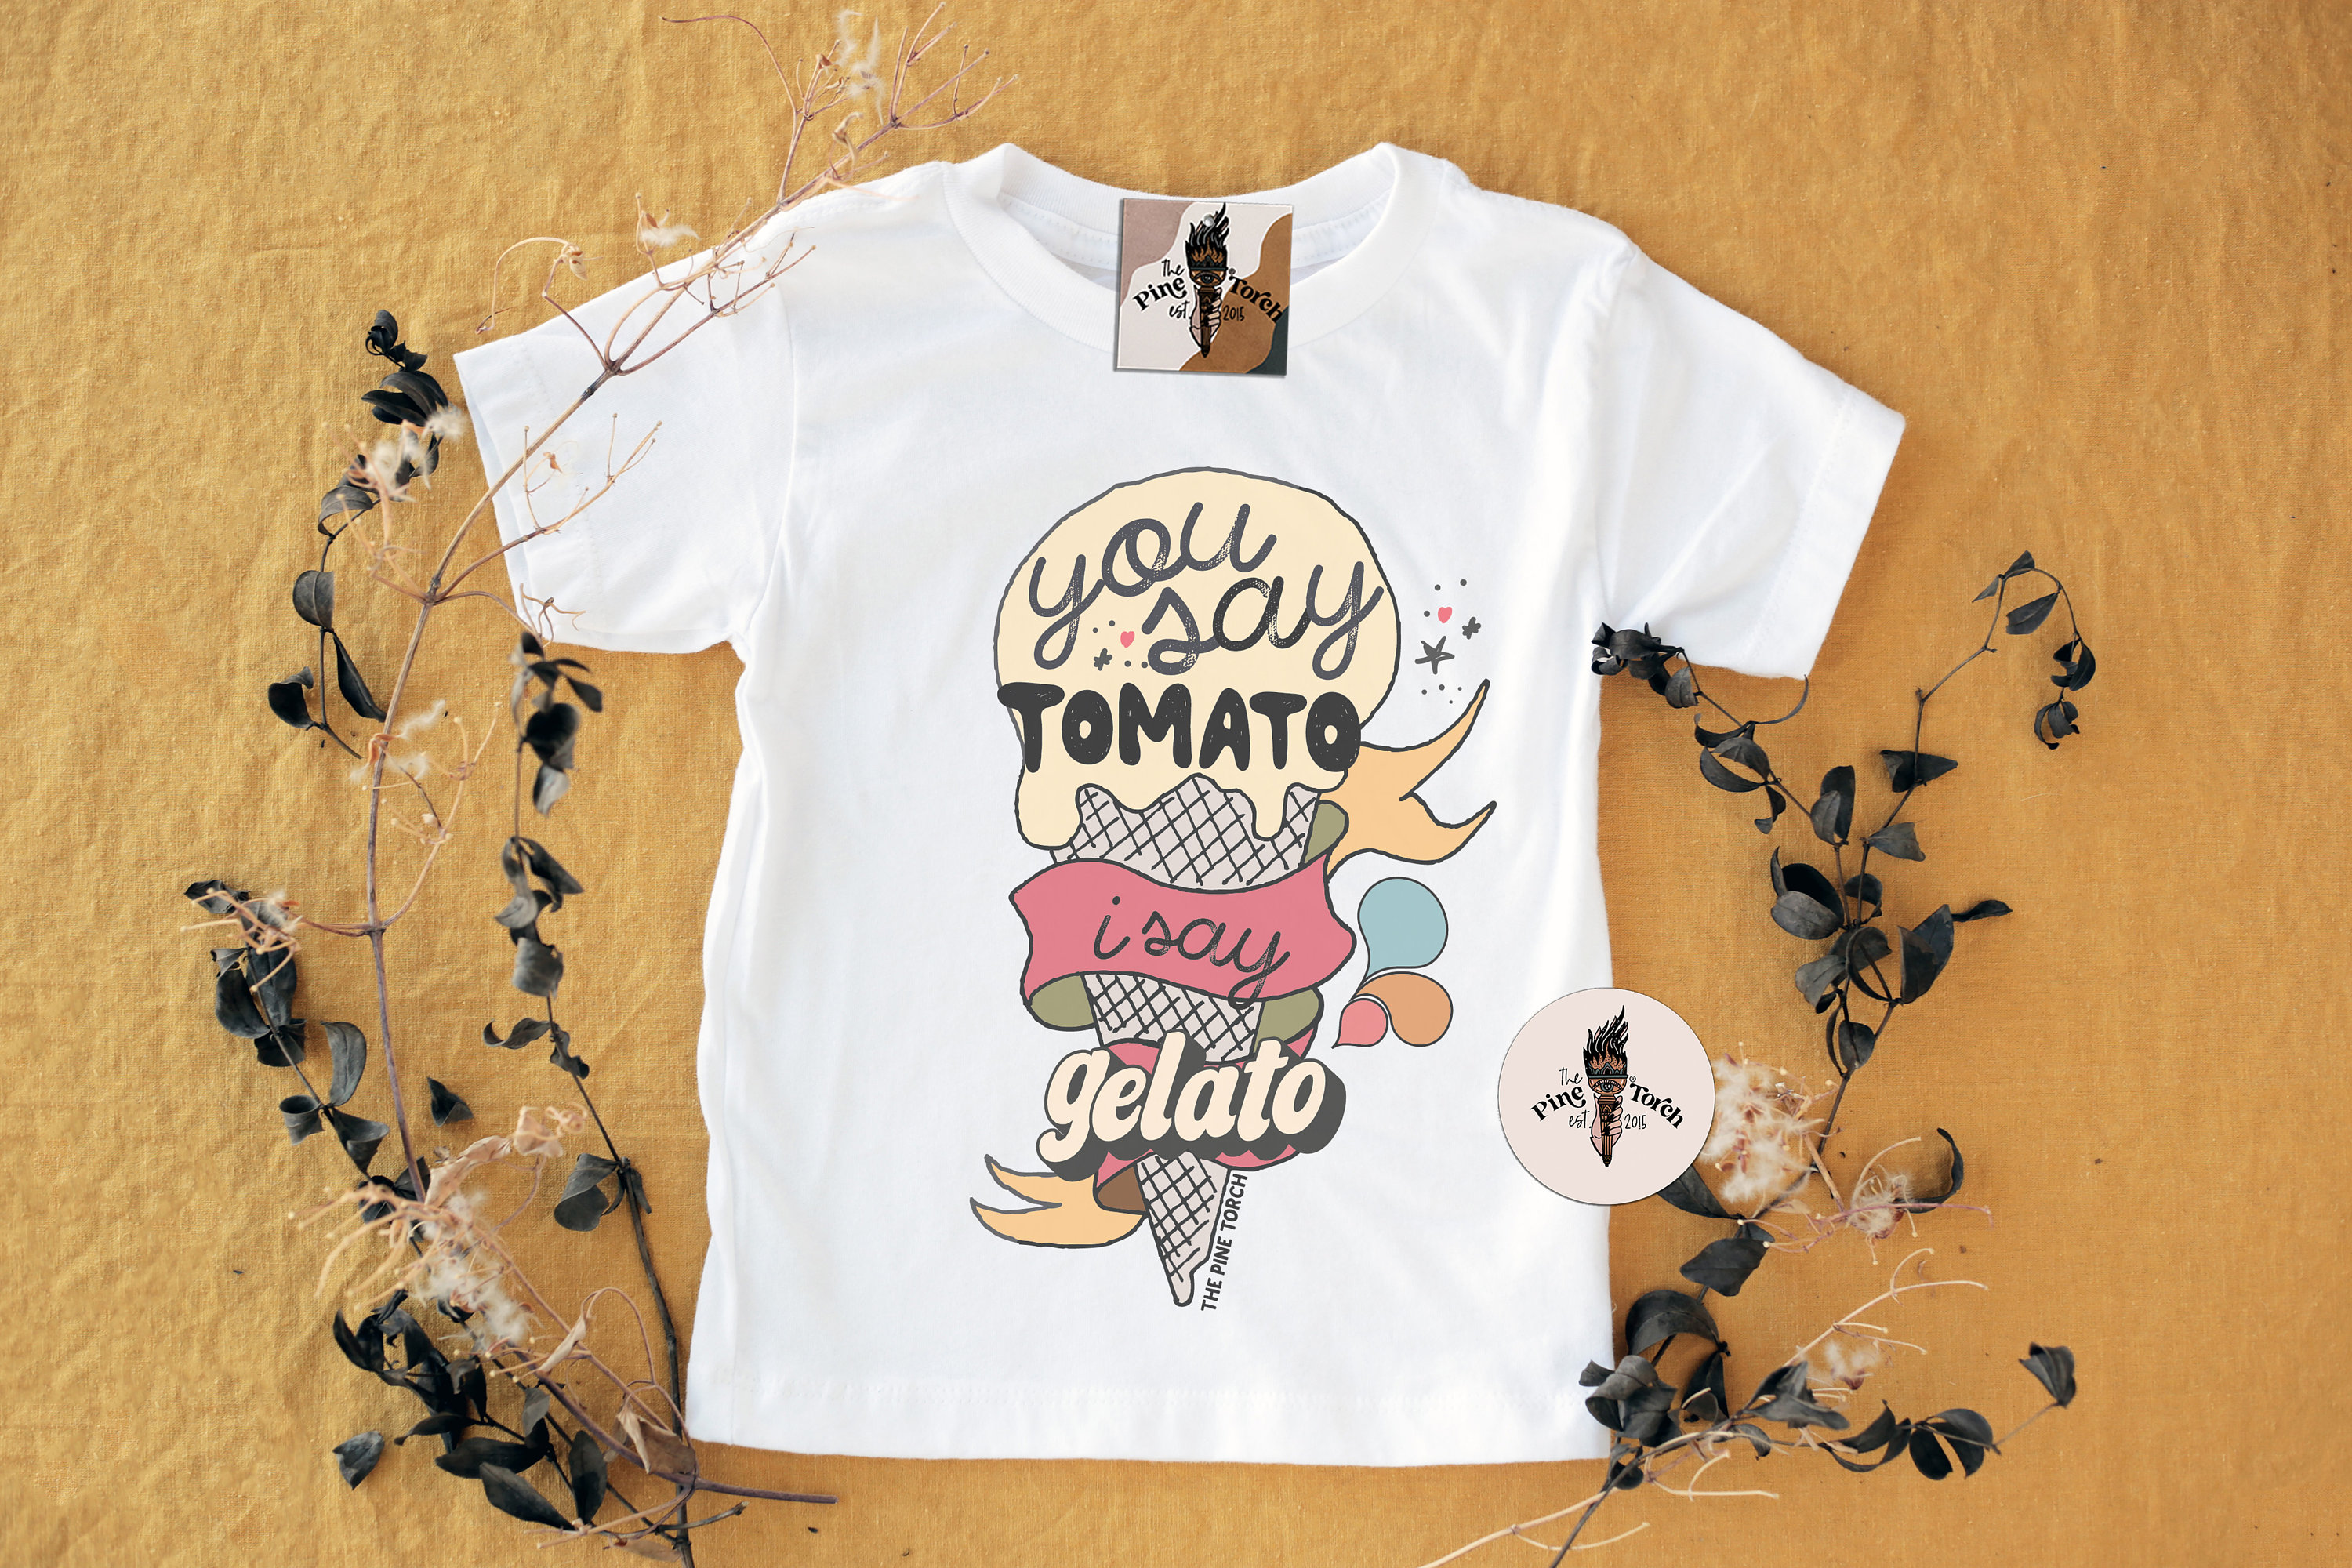 Women's Welcome to Italy Graphic Baby Tee